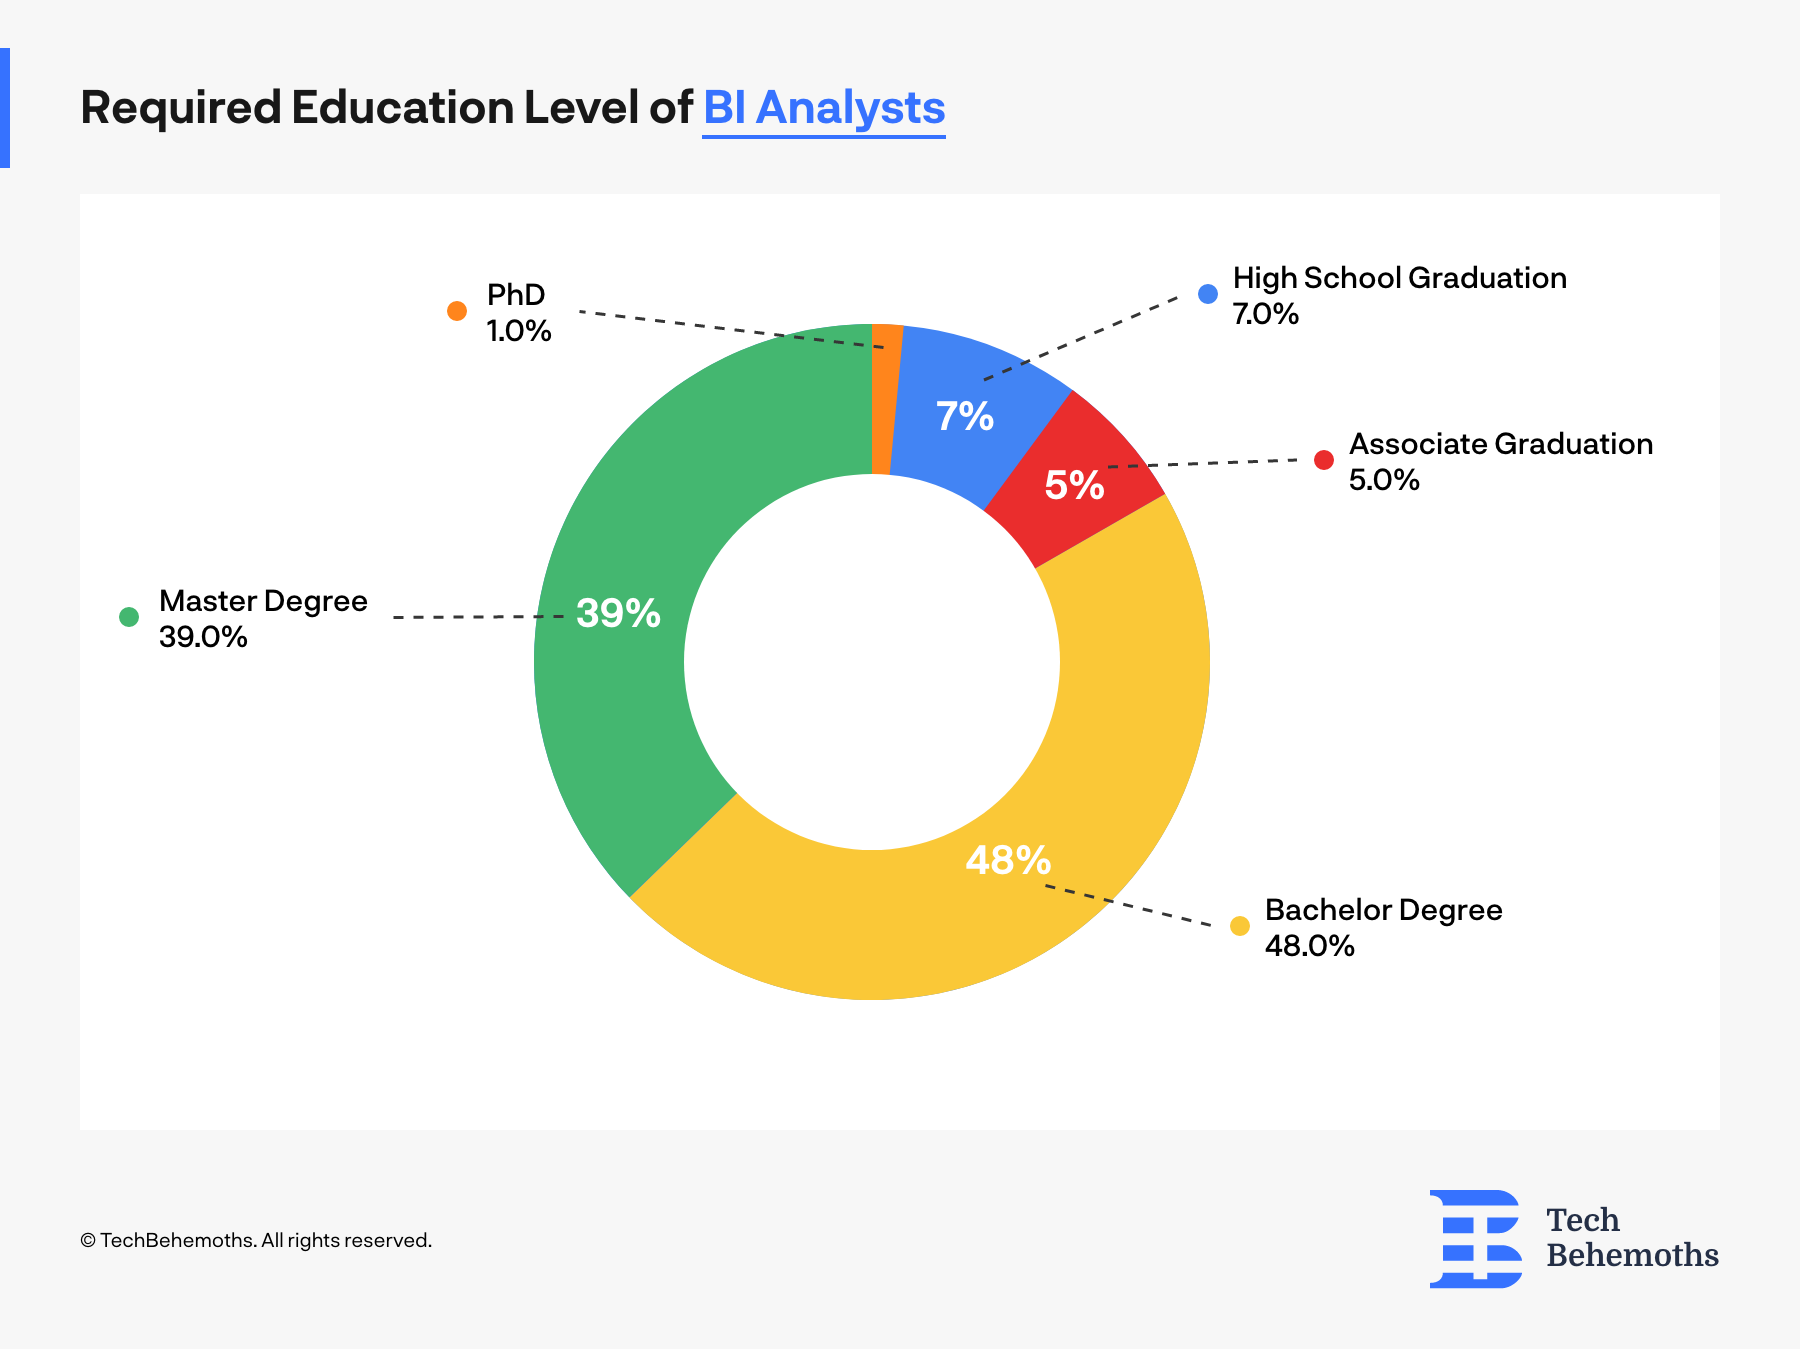 Required Education Level for BI Analysts 